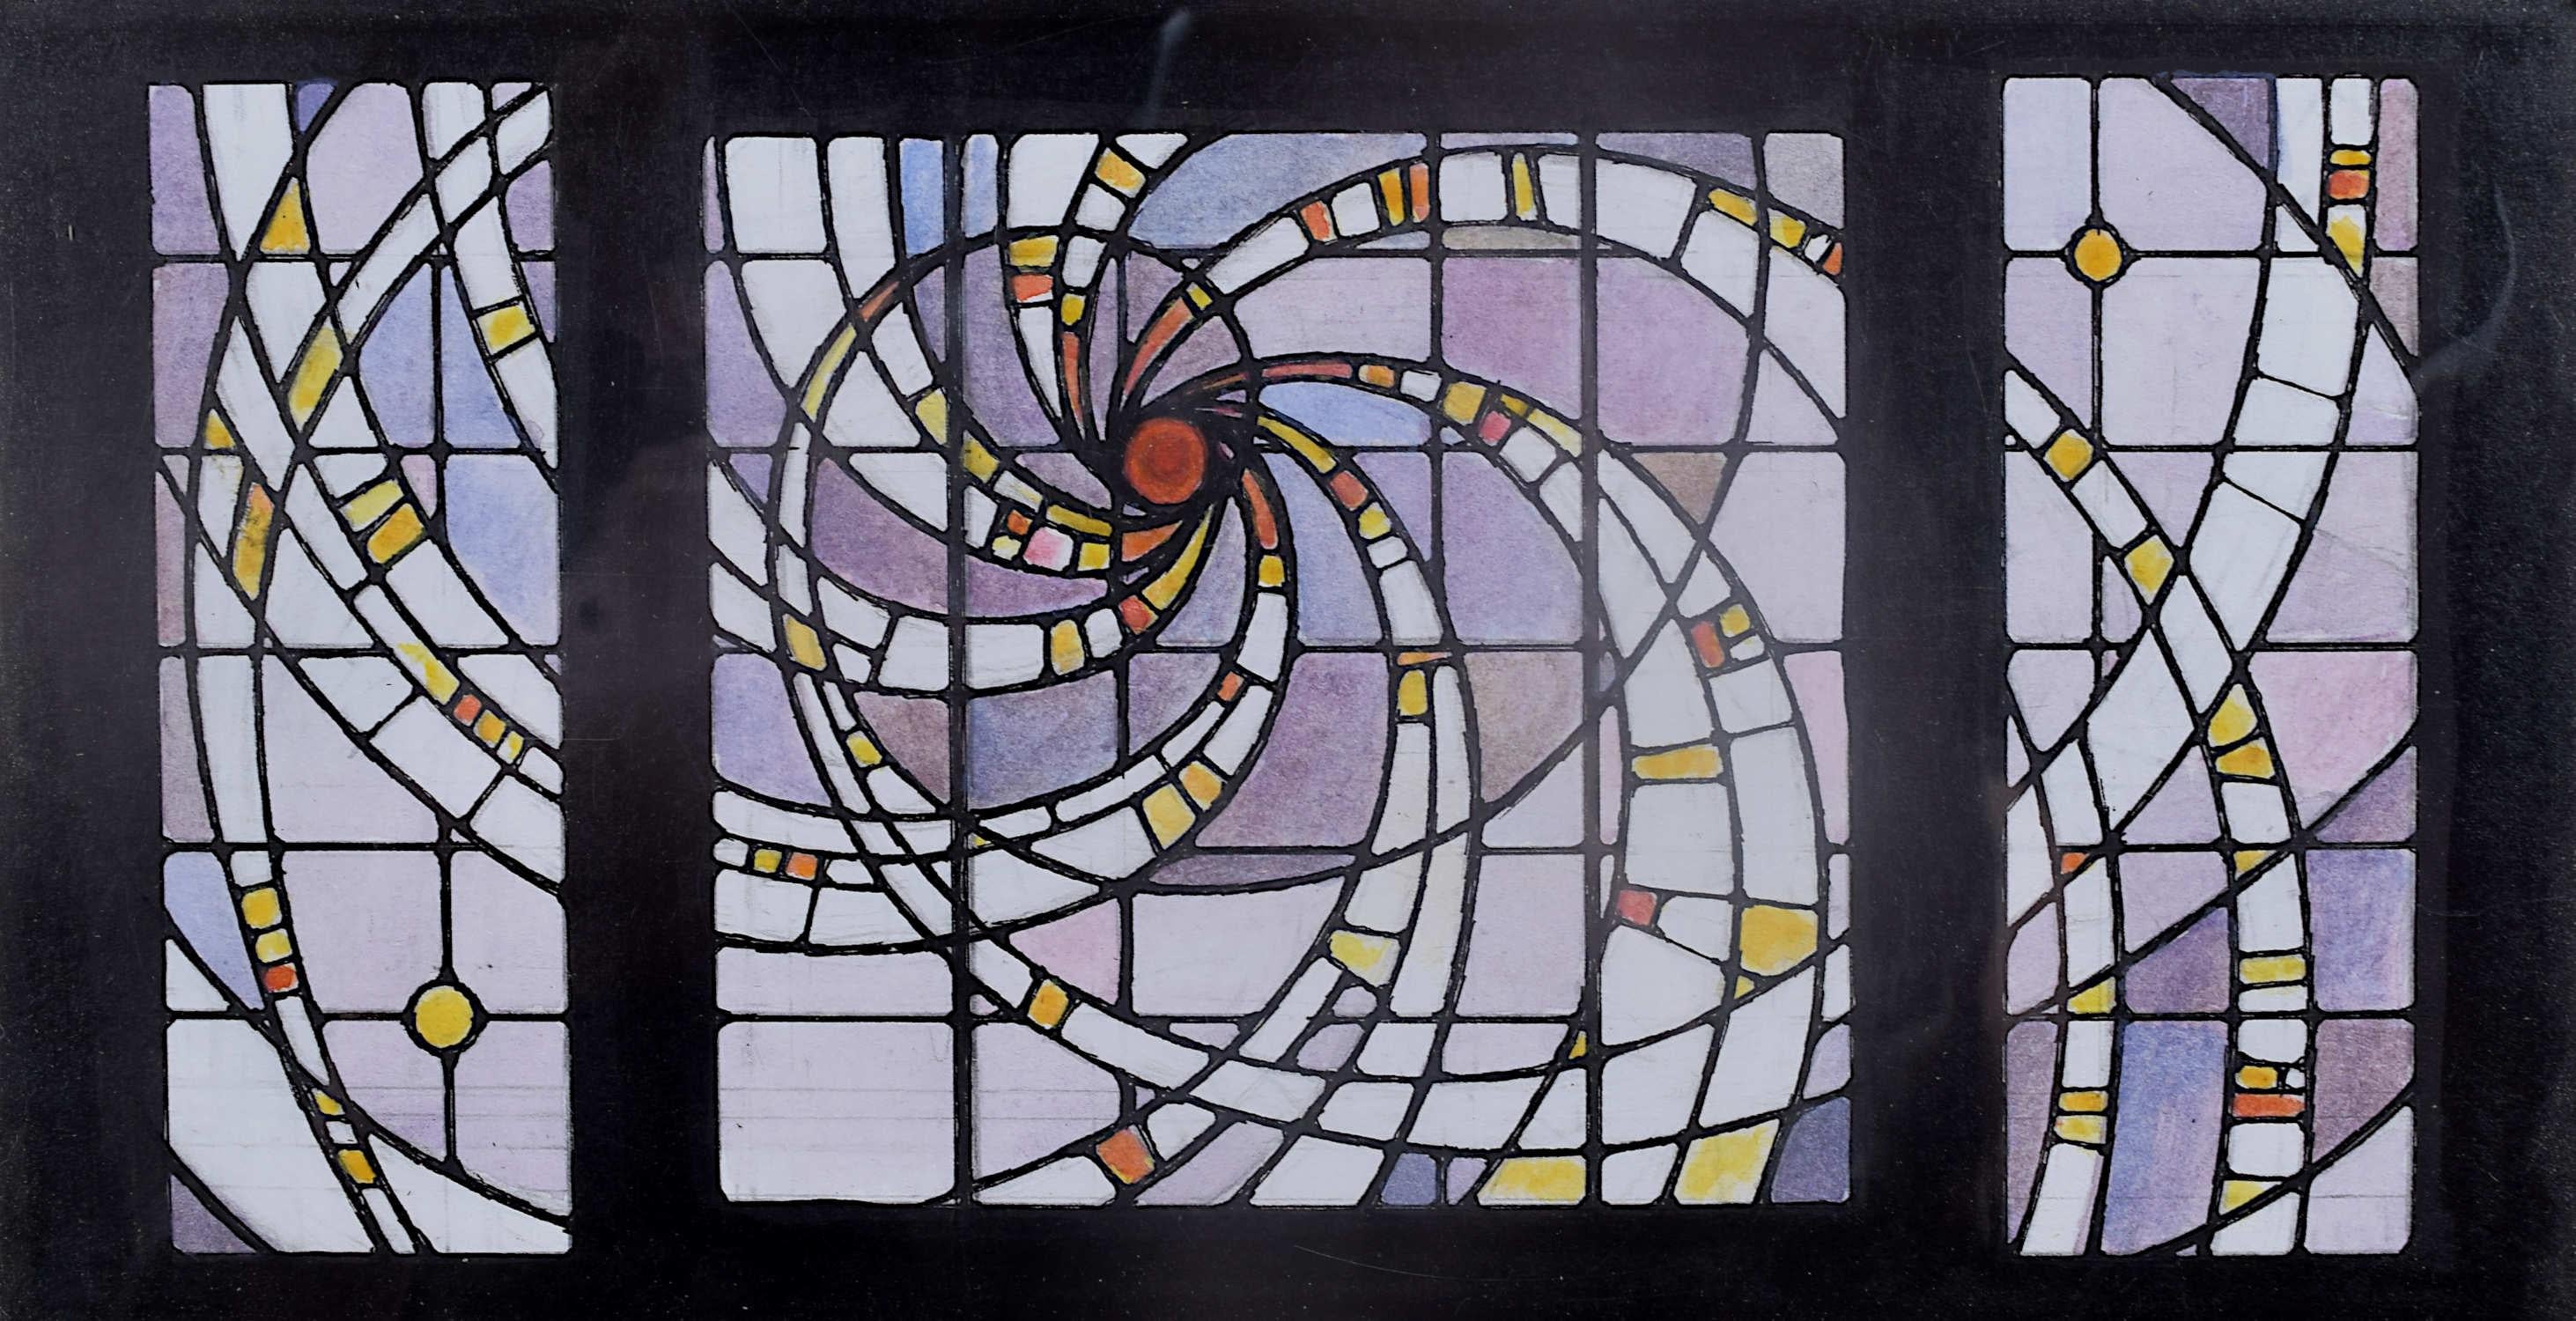 We acquired a series of watercolour stained glass designs from Jane Gray's studio. To find more scroll down to "More from this Seller" and below it click on "See all from this seller." 

Jane Gray (b.1931)
Stained Glass Design
Watercolour
10.5 x 20